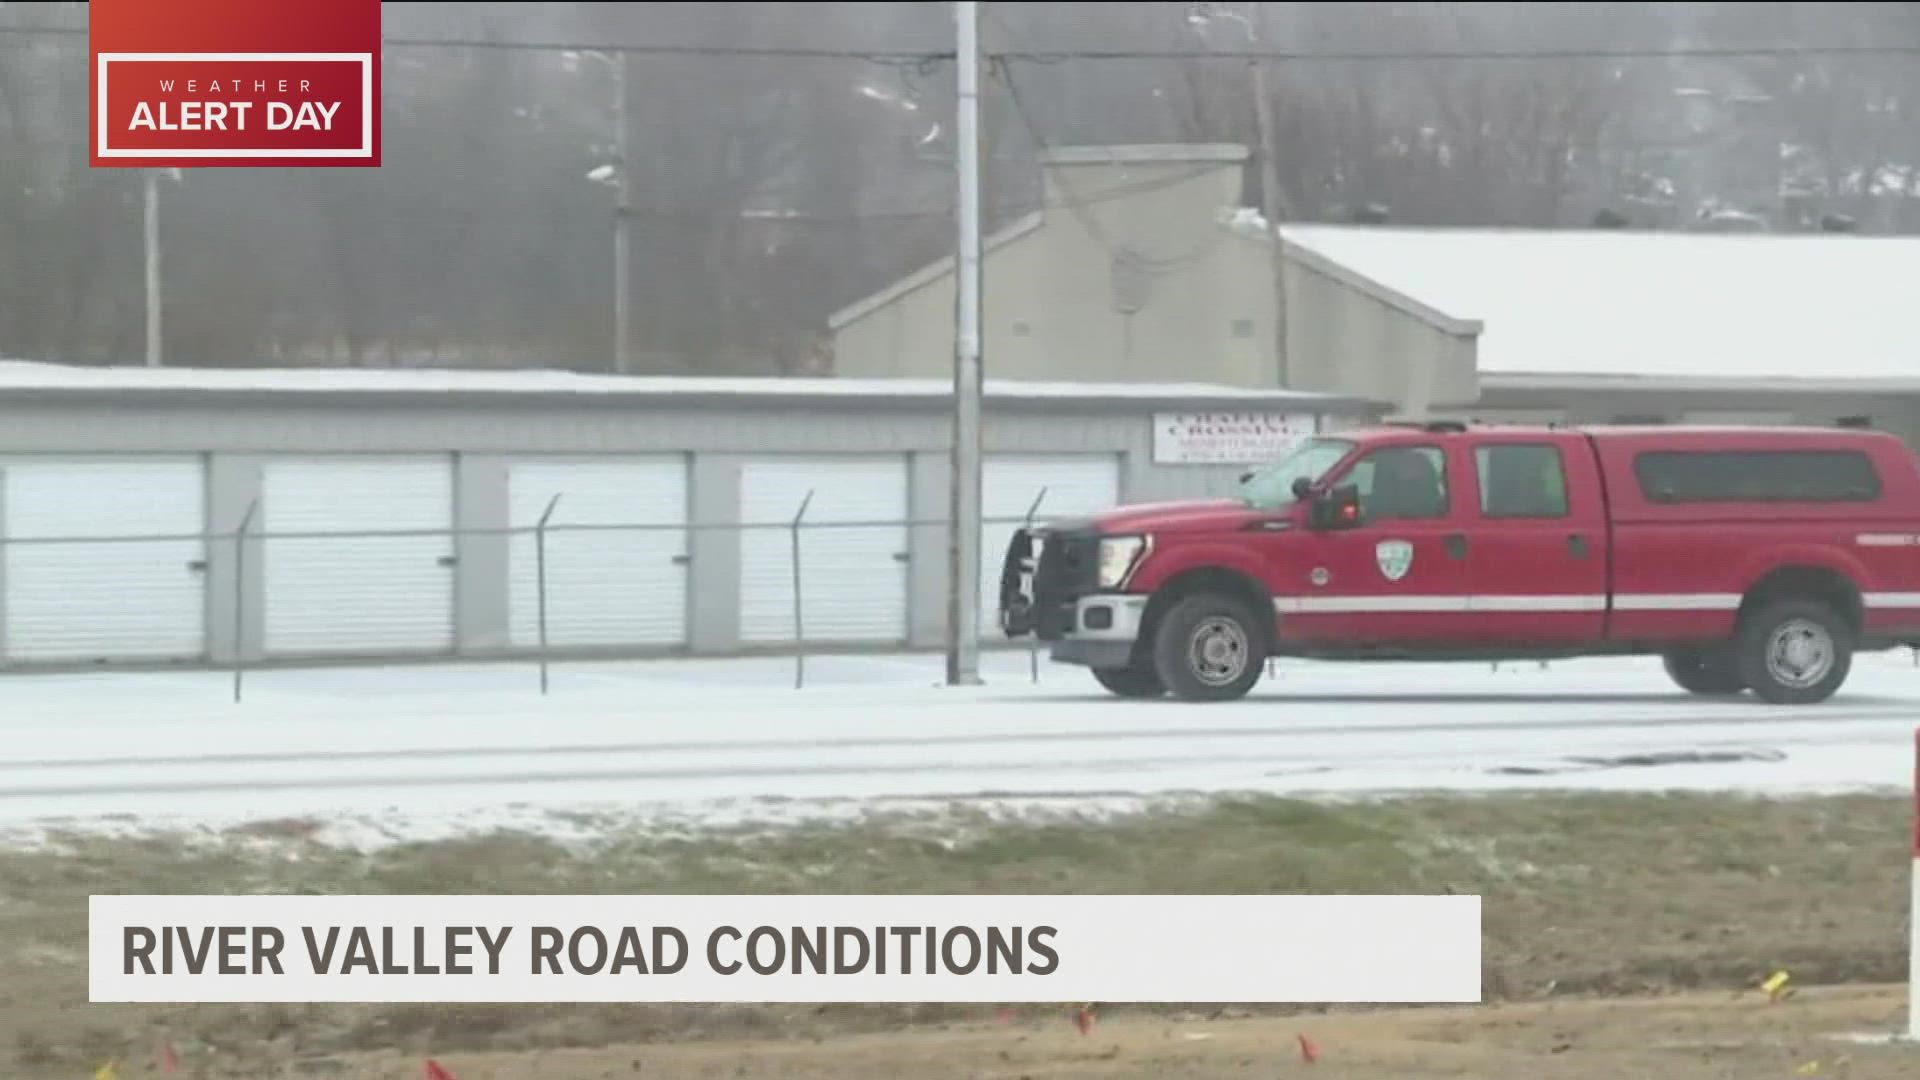 5NEWS crews are in Northwest Arkansas and the River Valley to bring you the latest road conditions.